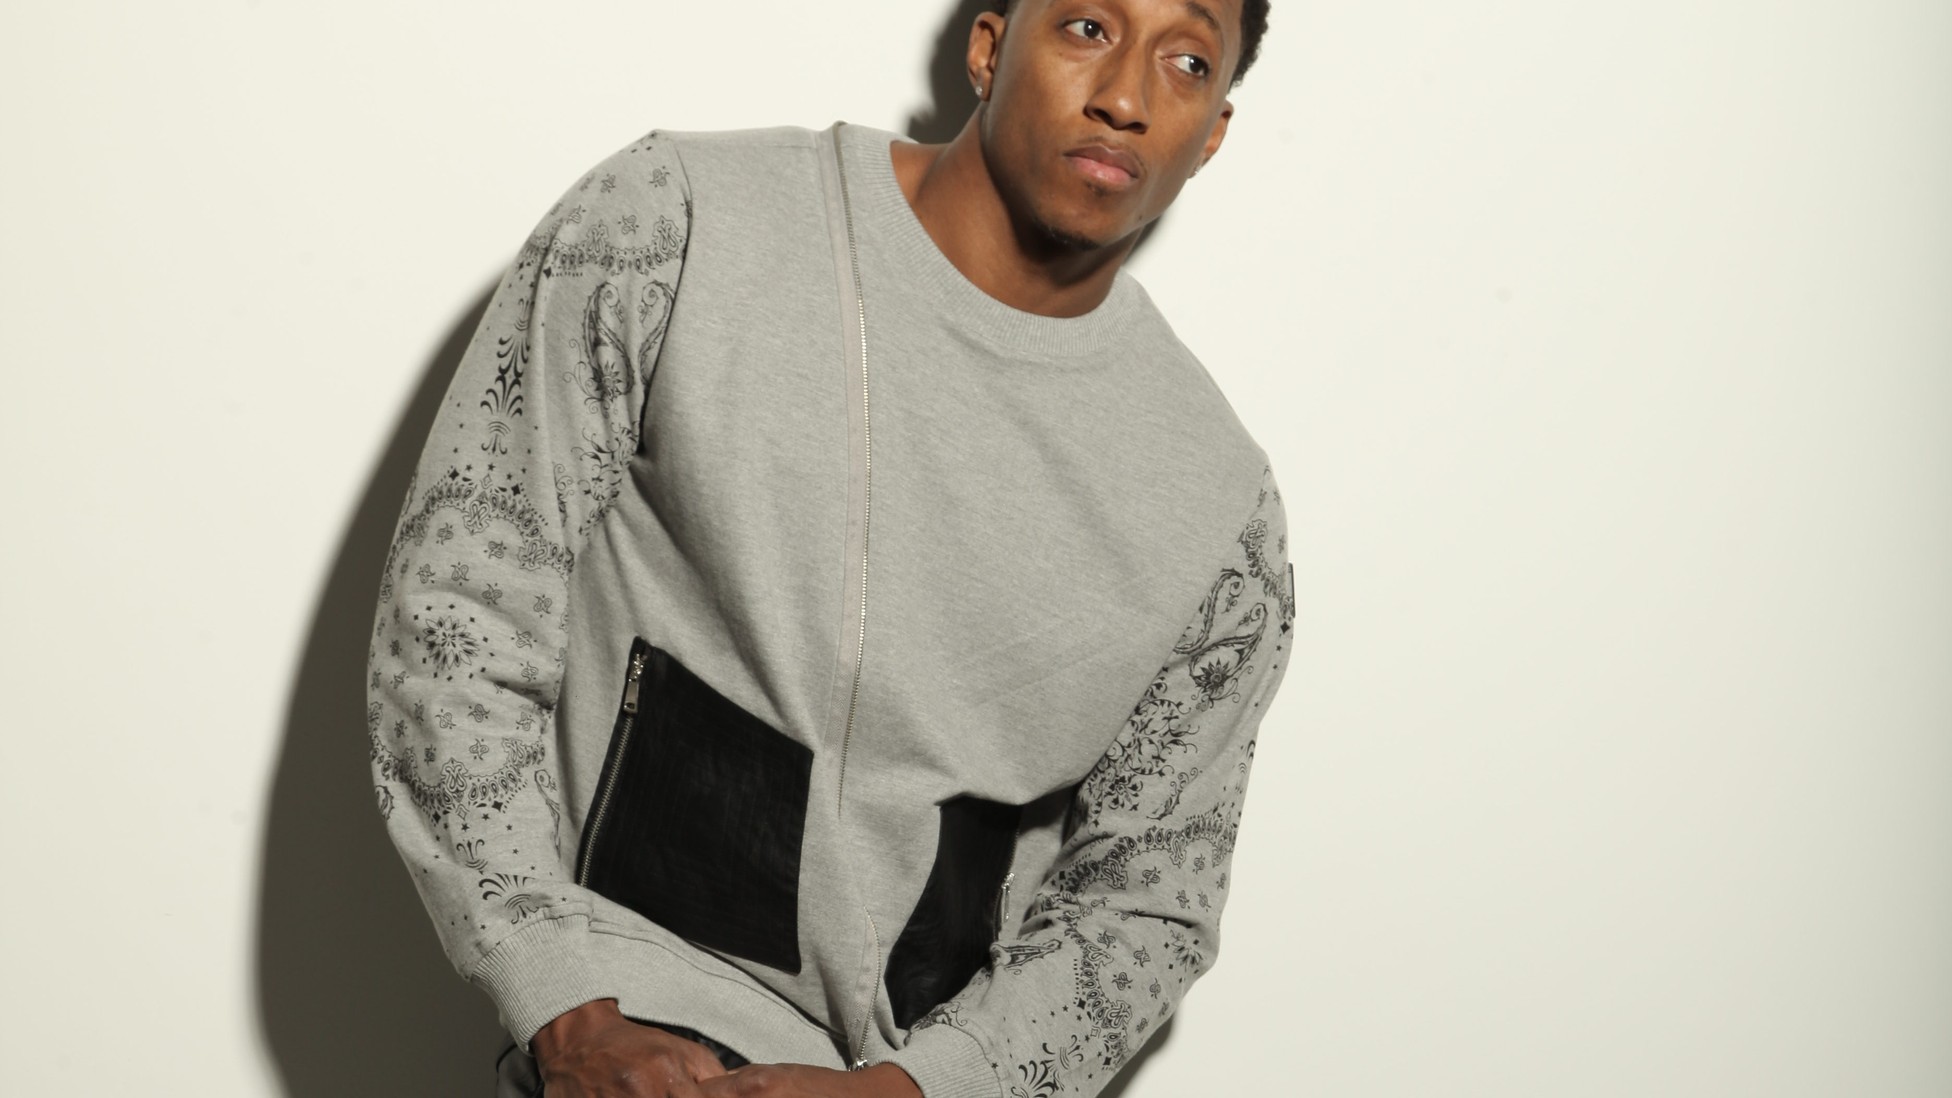 Lecrae: 'Christians Have Prostituted Art to Give Answers' - The Atlantic